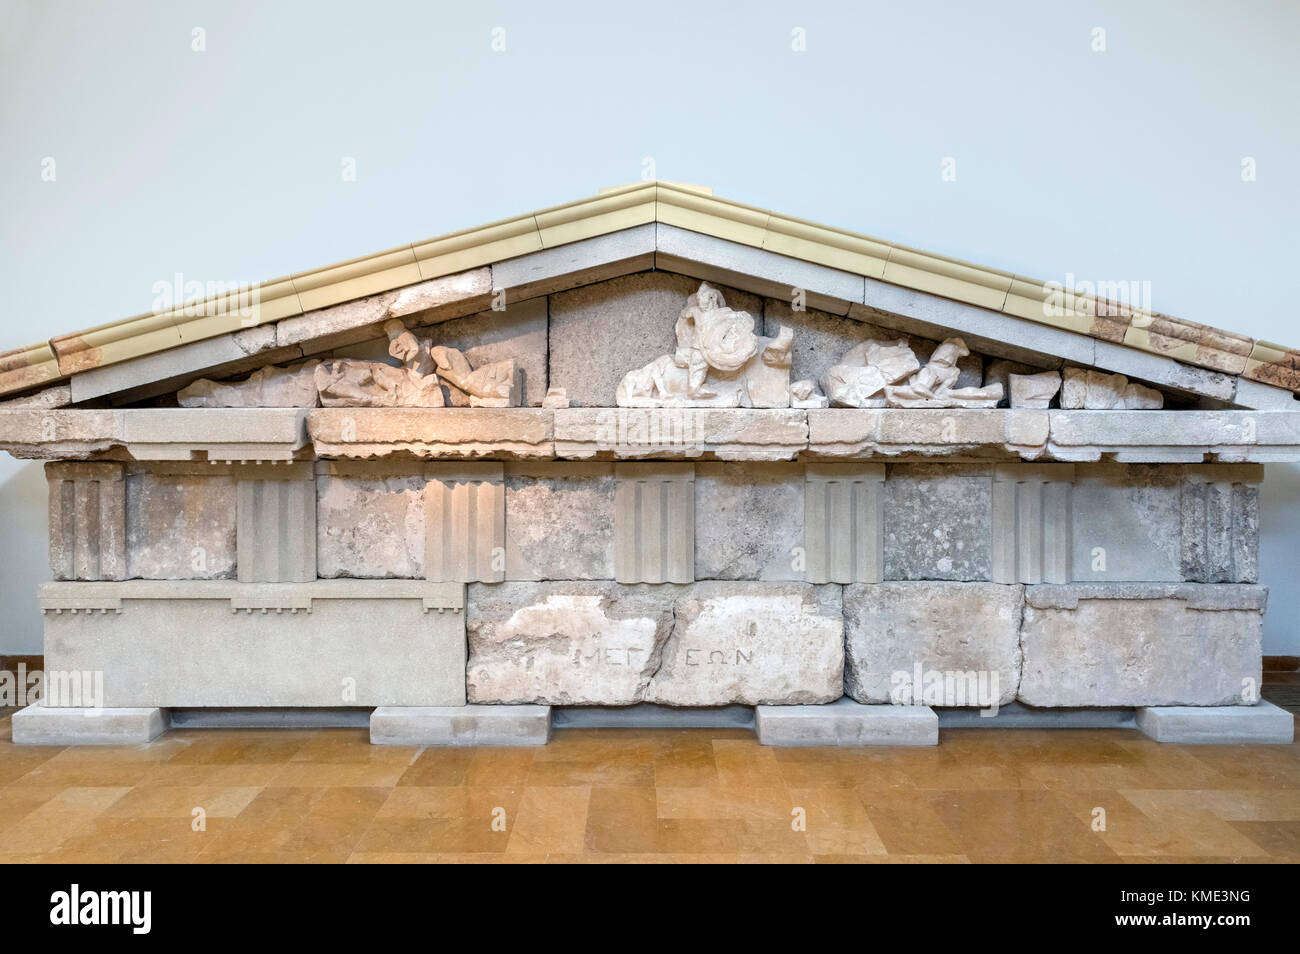 Pediment of the Treasury of the Megarians, dating from around the 6th century BC, Archaeological Museum of Olympia, Olympia, Pelopponese, Greece Stock Photo